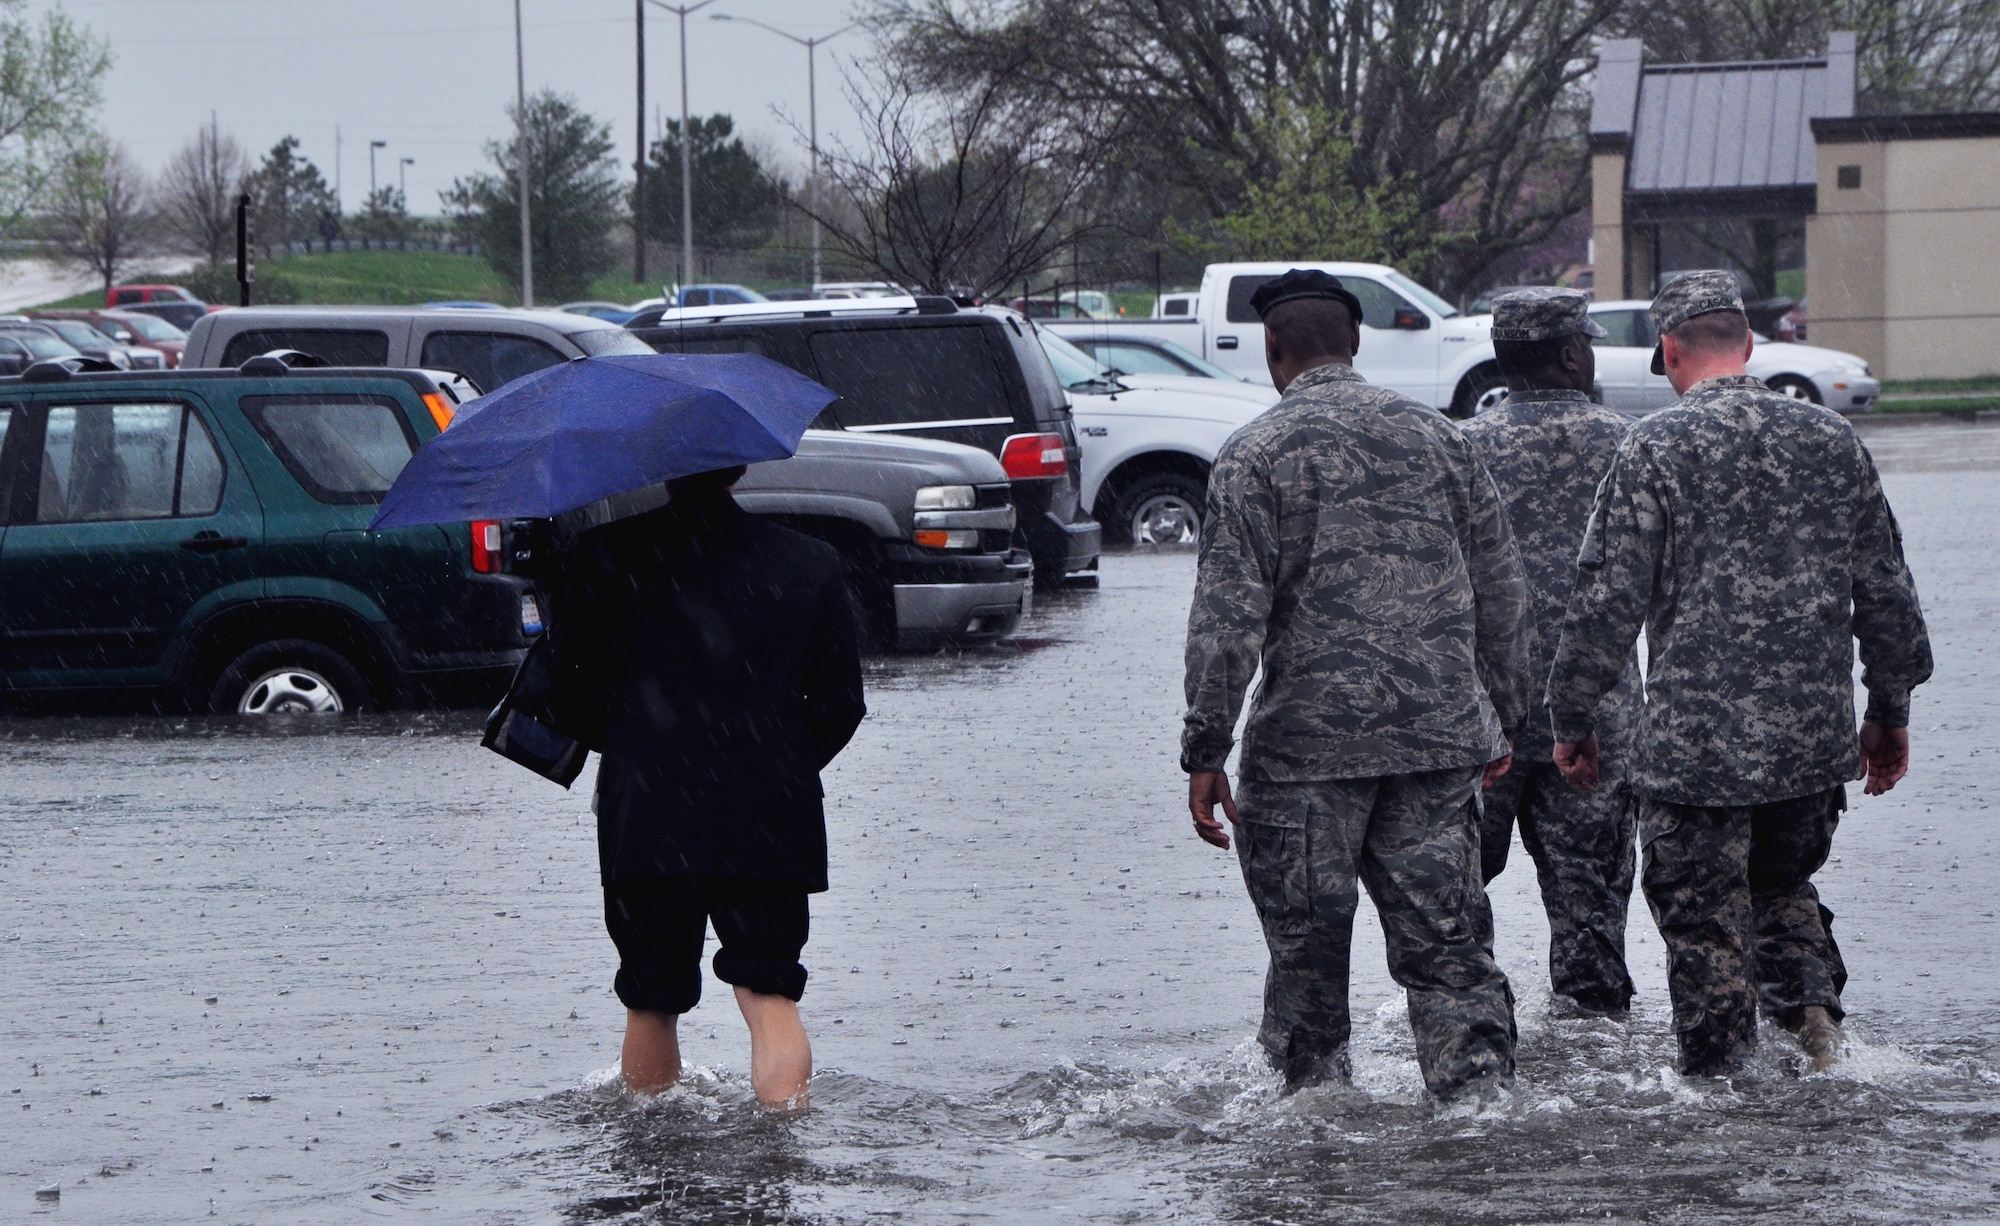 Servicemembers help a civilian to her car at Scott April 18, 2013 after rain dumped 5.2 inches on the base, causing floods and damage to vehicles and buildings. Throughout the day, servicemembers helped move cars from the flooded areas, while security forces members helped people exit the base and civil engineers assessed damage. (U.S. Air Force photo/Airman Megan Friedl)